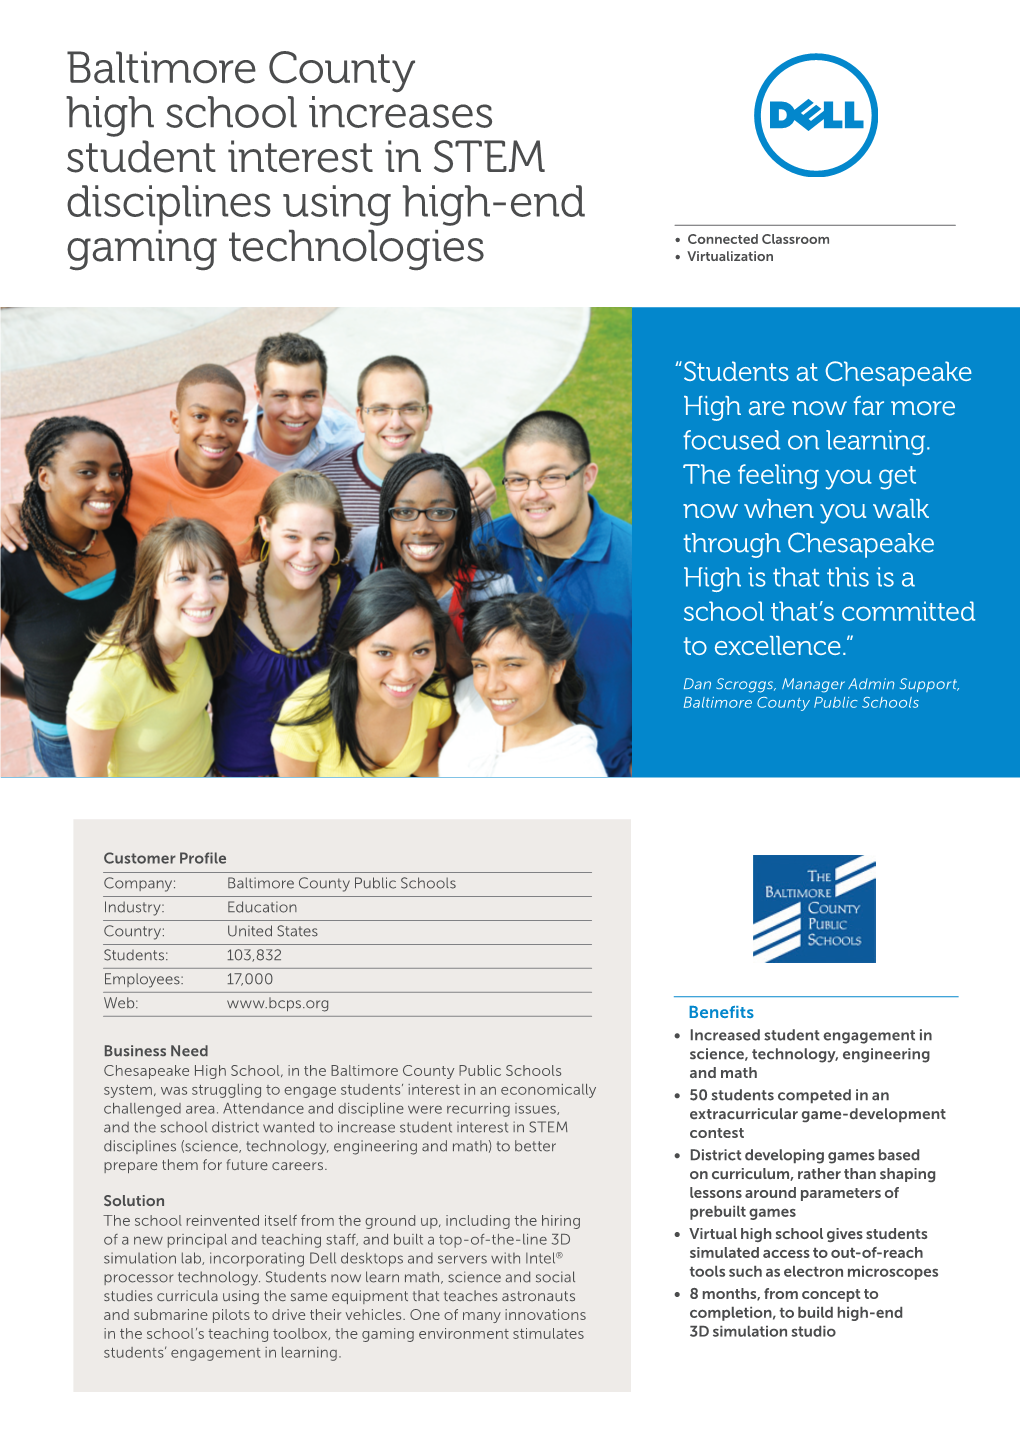 Baltimore County High School Increases Student Interest in STEM Disciplines Using High-End • Connected Classroom Gaming Technologies • Virtualization